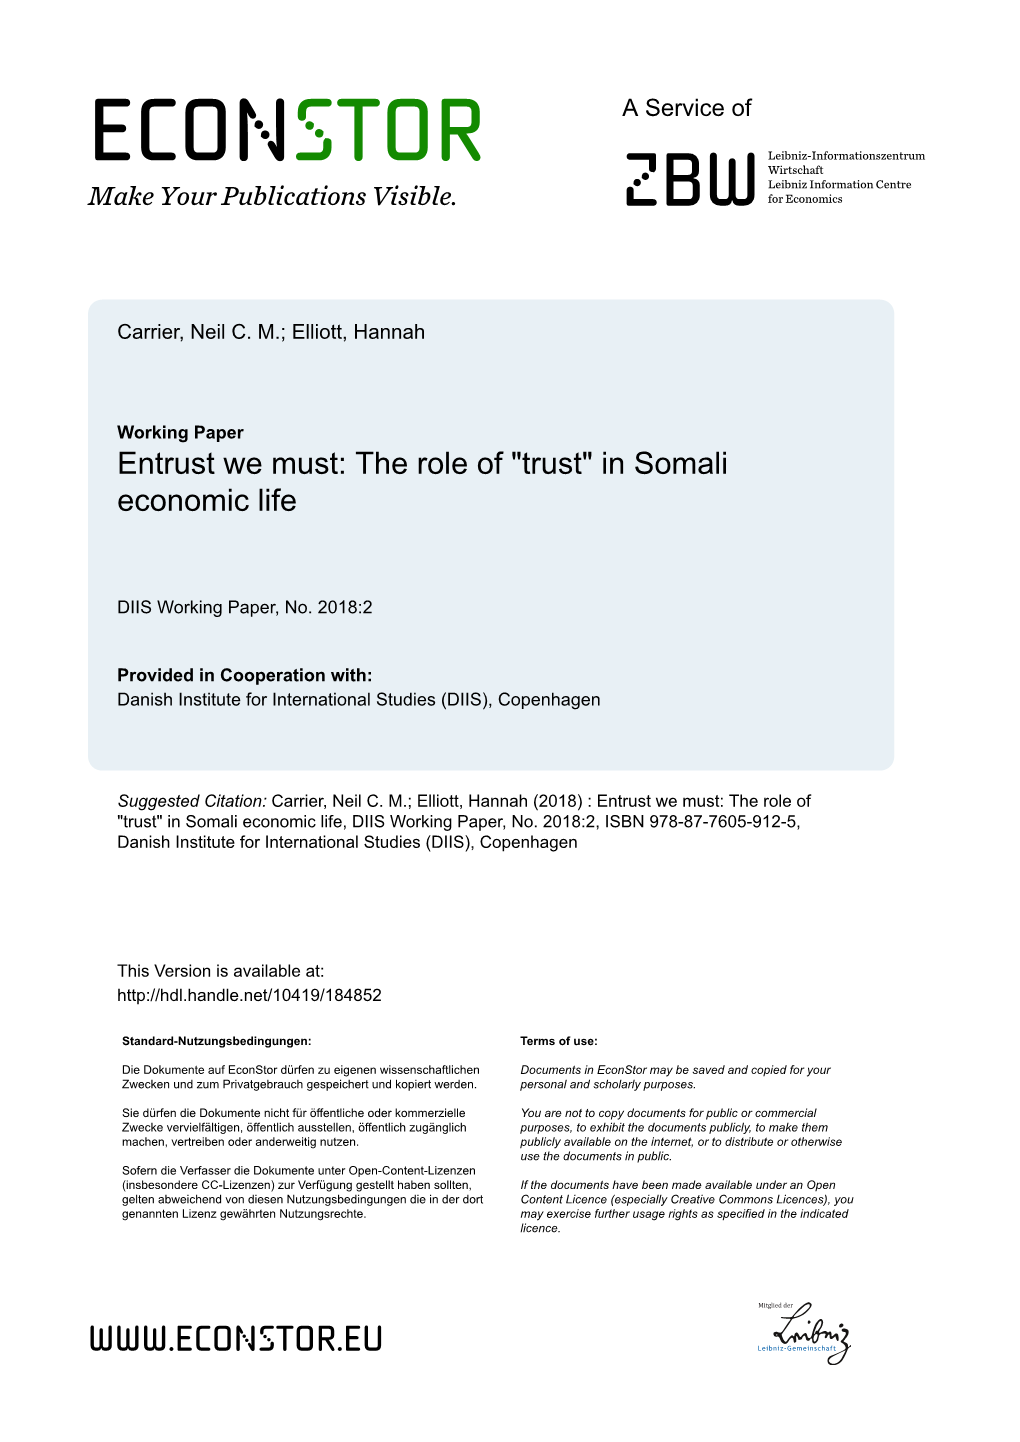 Entrust We Must: the Role of "Trust" in Somali Economic Life